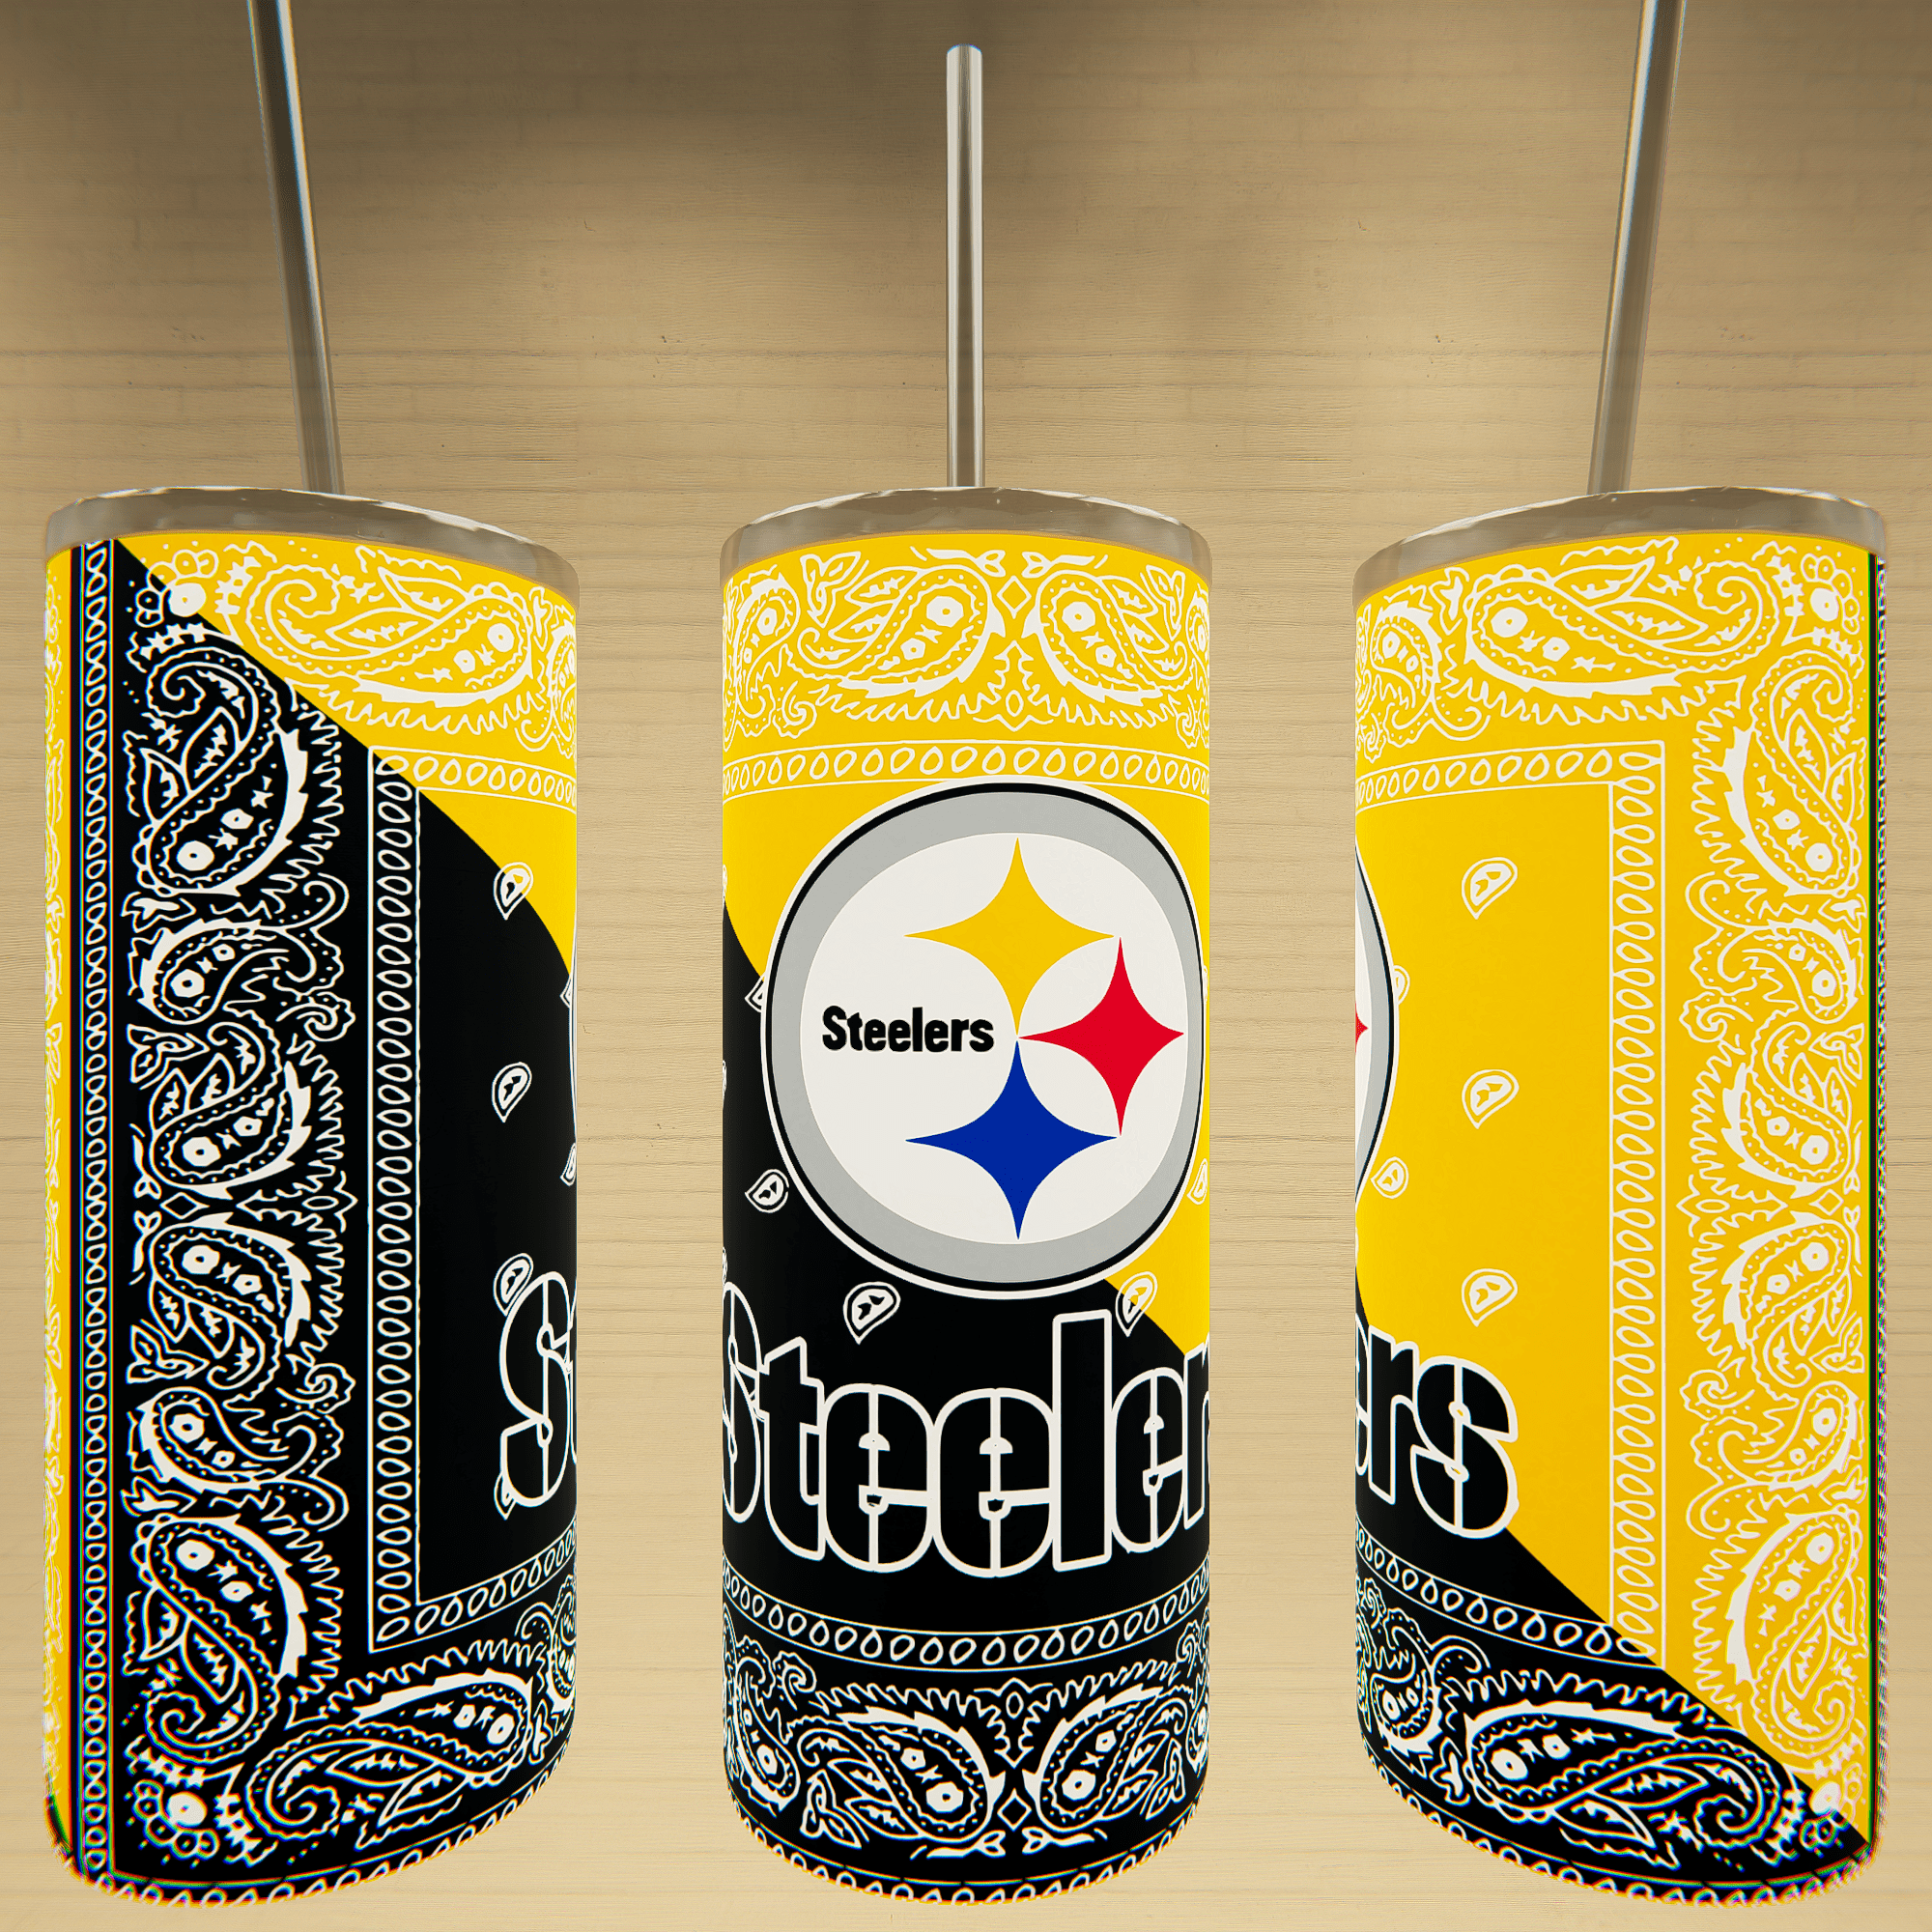 https://day2daycreations.com/wp-content/uploads/2022/01/Steelers-Football-Team-Tumbler-min.png